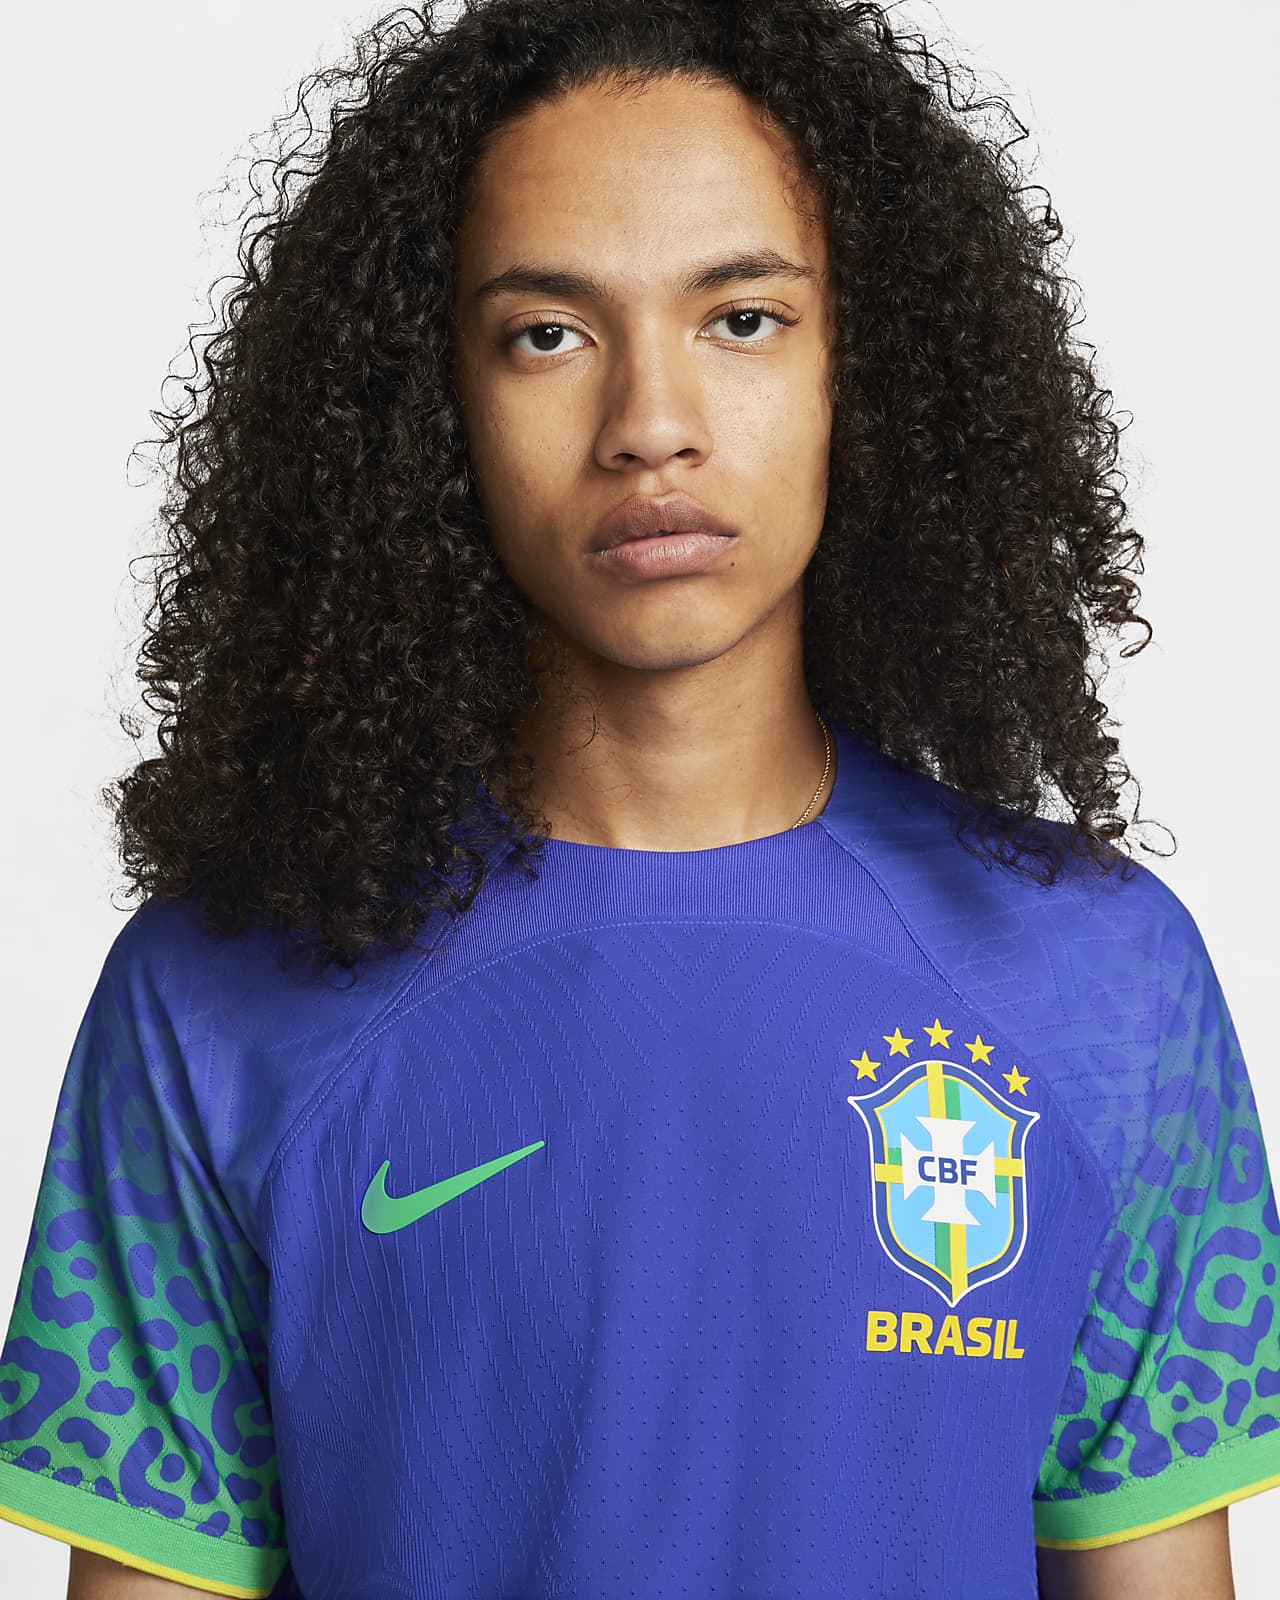 New Arriavl Champion Brazil Soccer Jersey for Kids and Adults